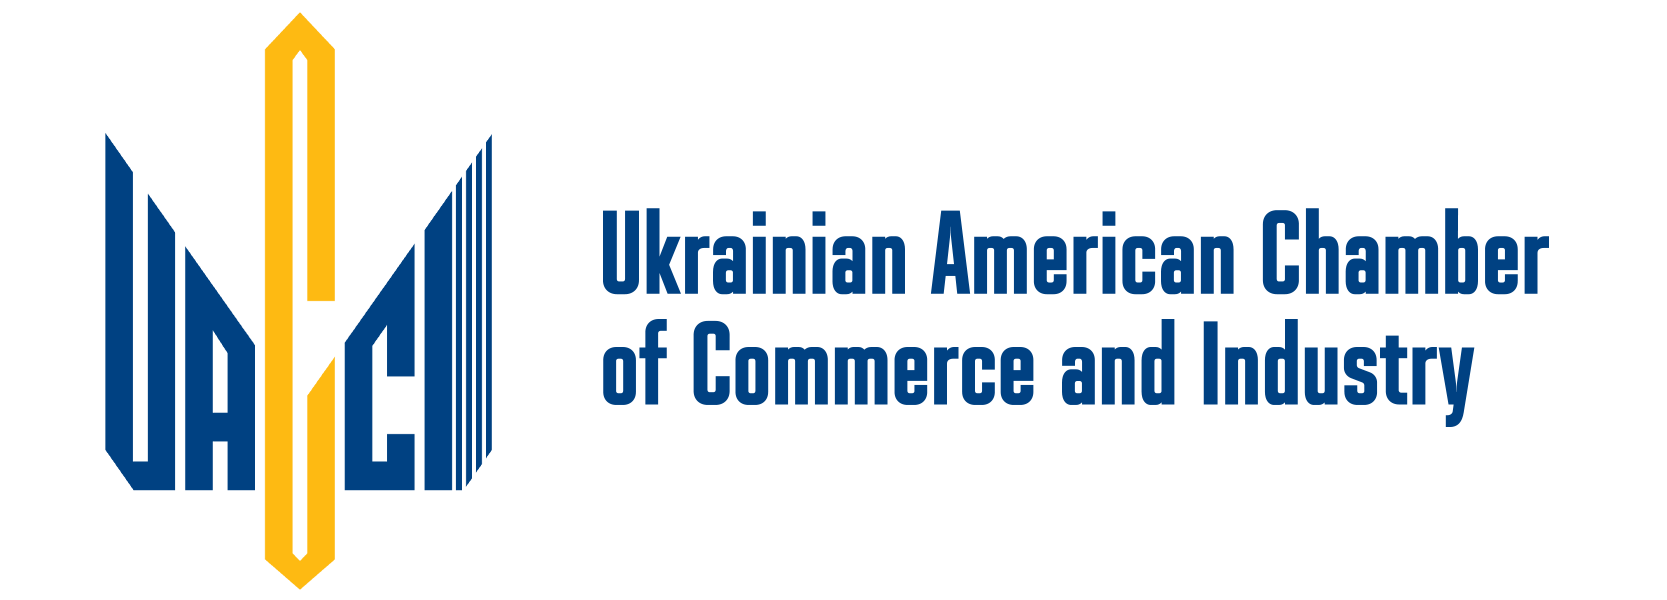 Ukrainian American Chamber of Commerce and Industry Website Logo